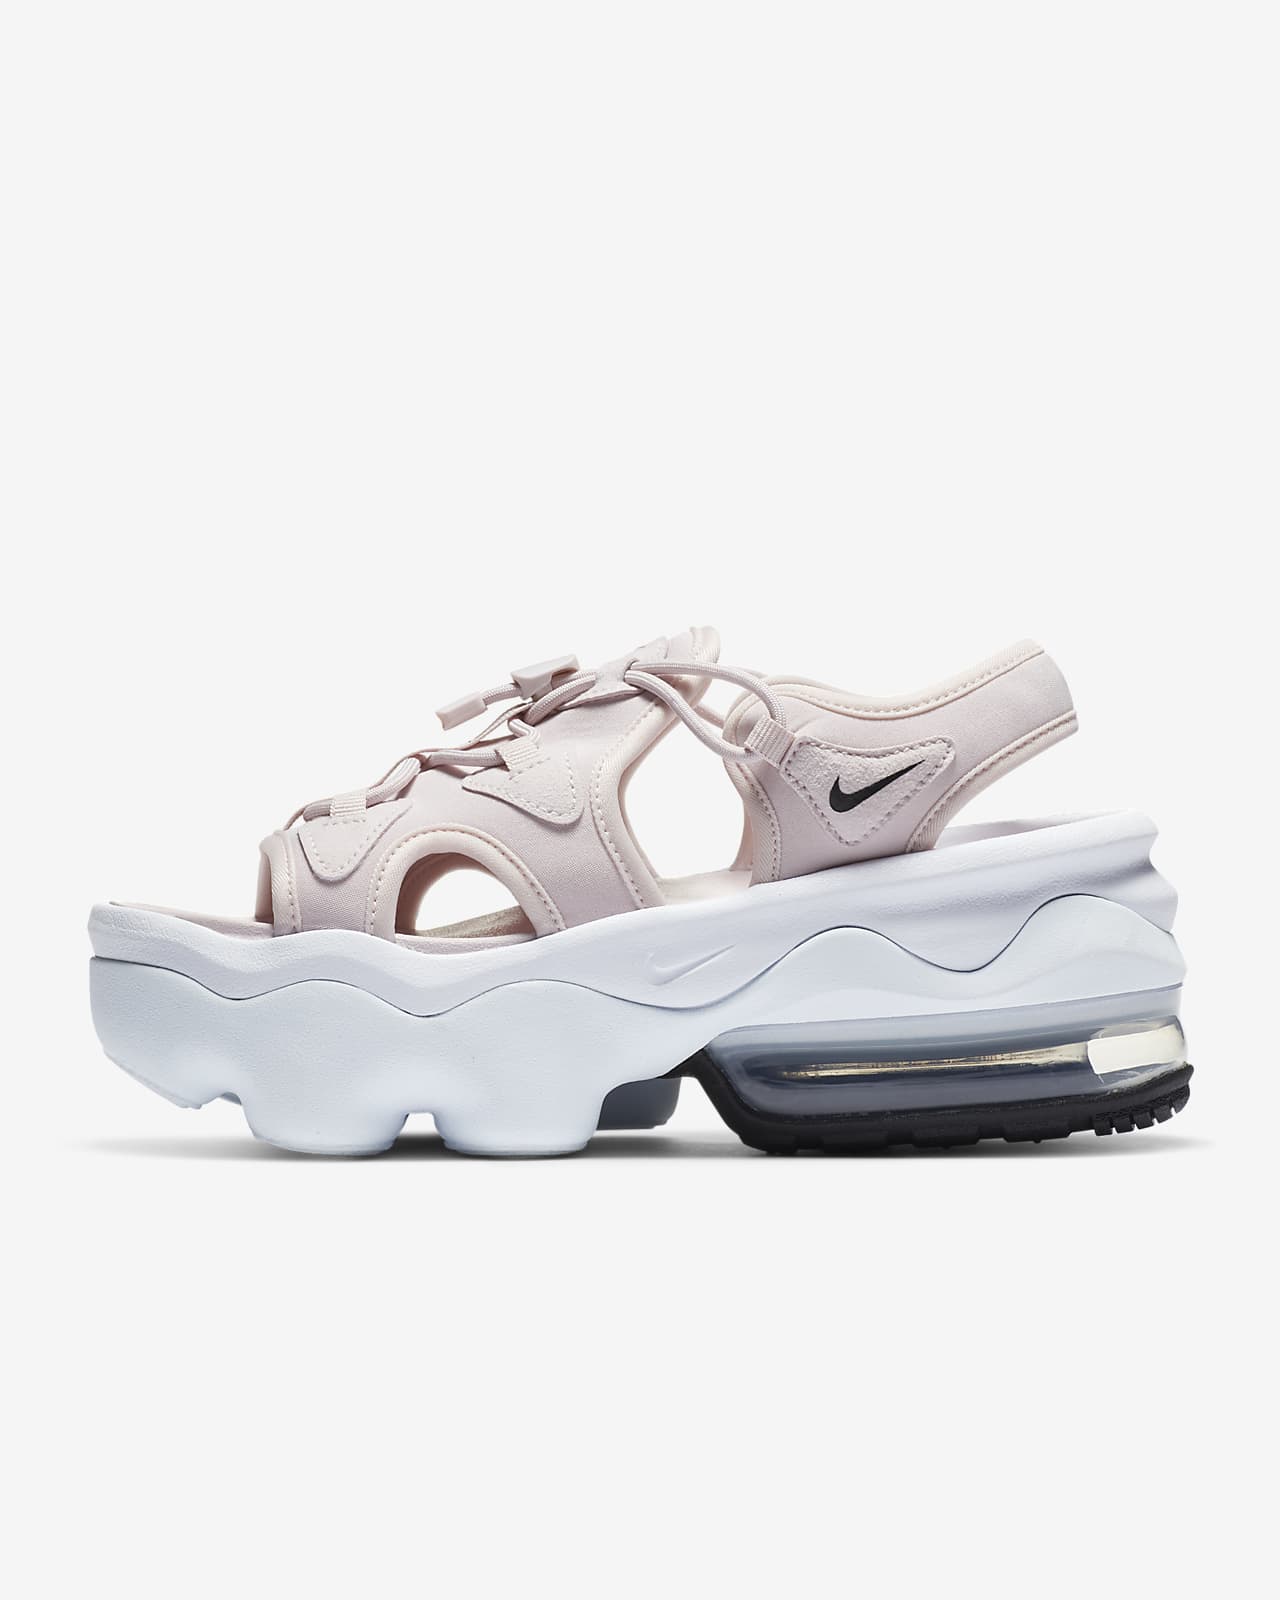 nike air max sandals for sale